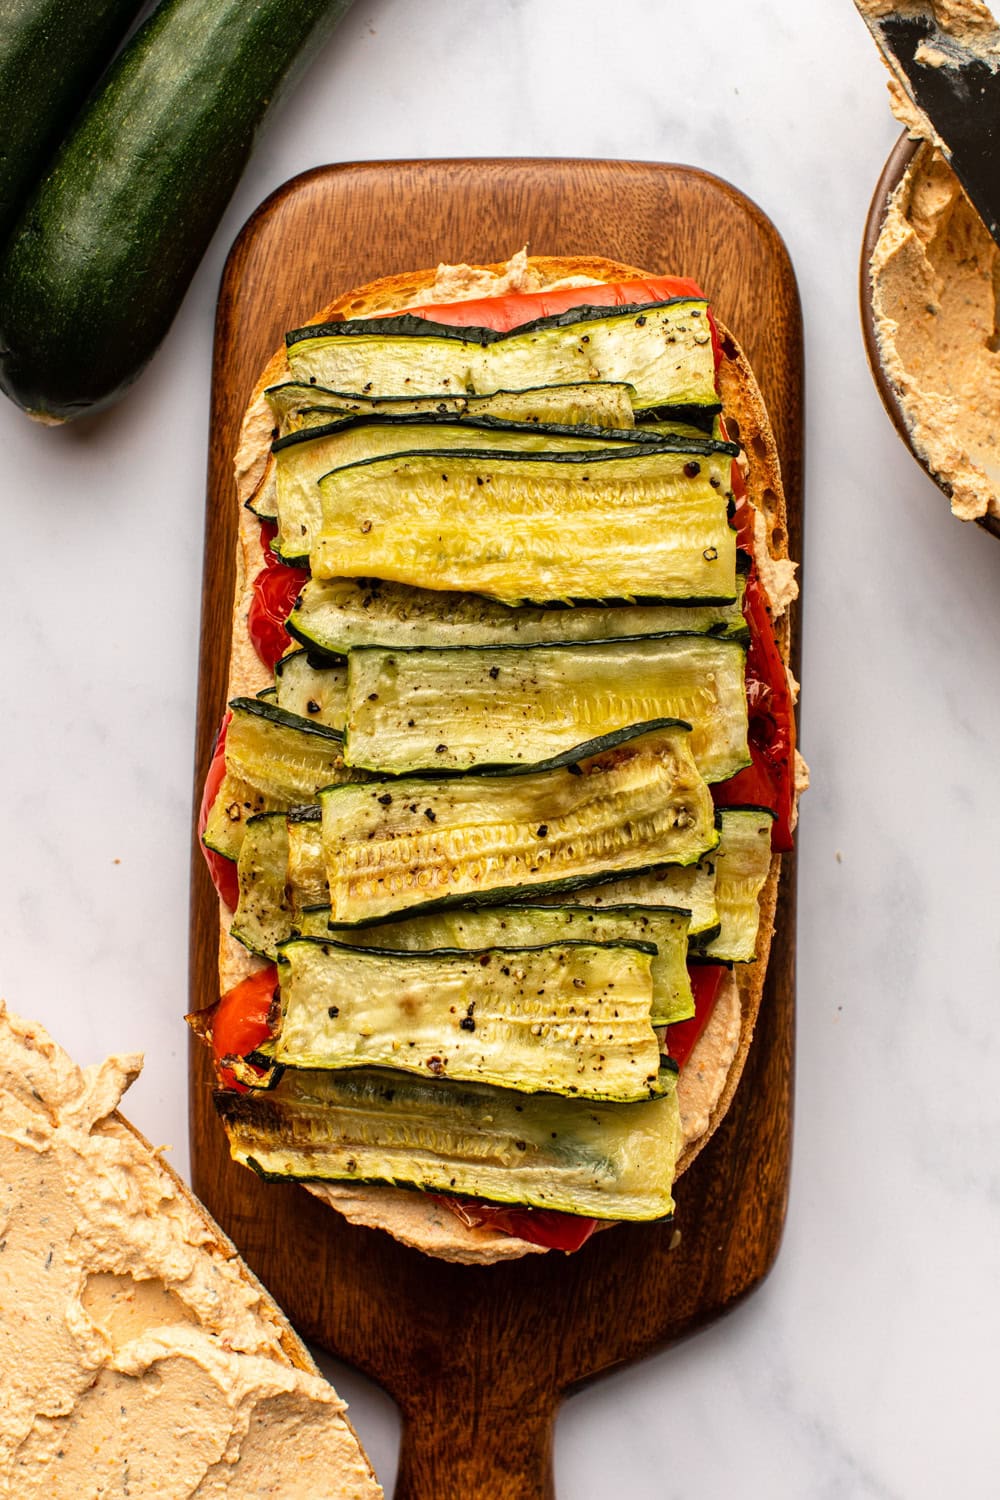 Roasted Zucchini Sandwich - From My Bowl